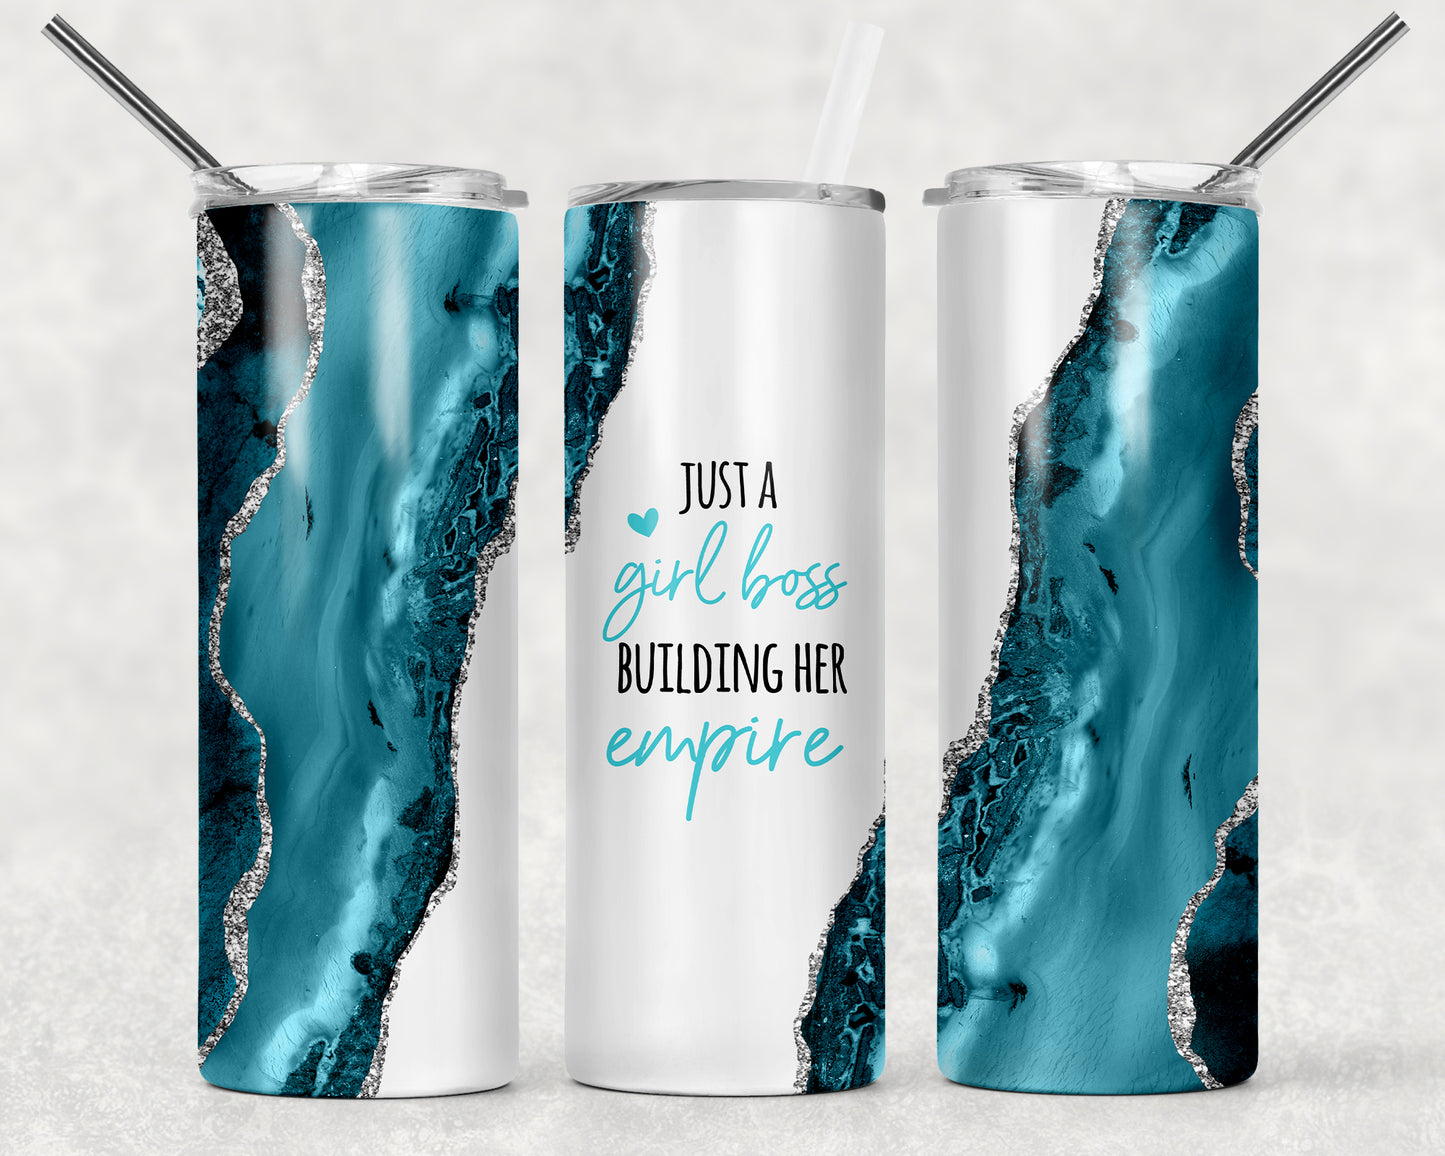 Just a Girl Boss Buidling Her Empire White and Turquoise 20oz Skinny Tumbler